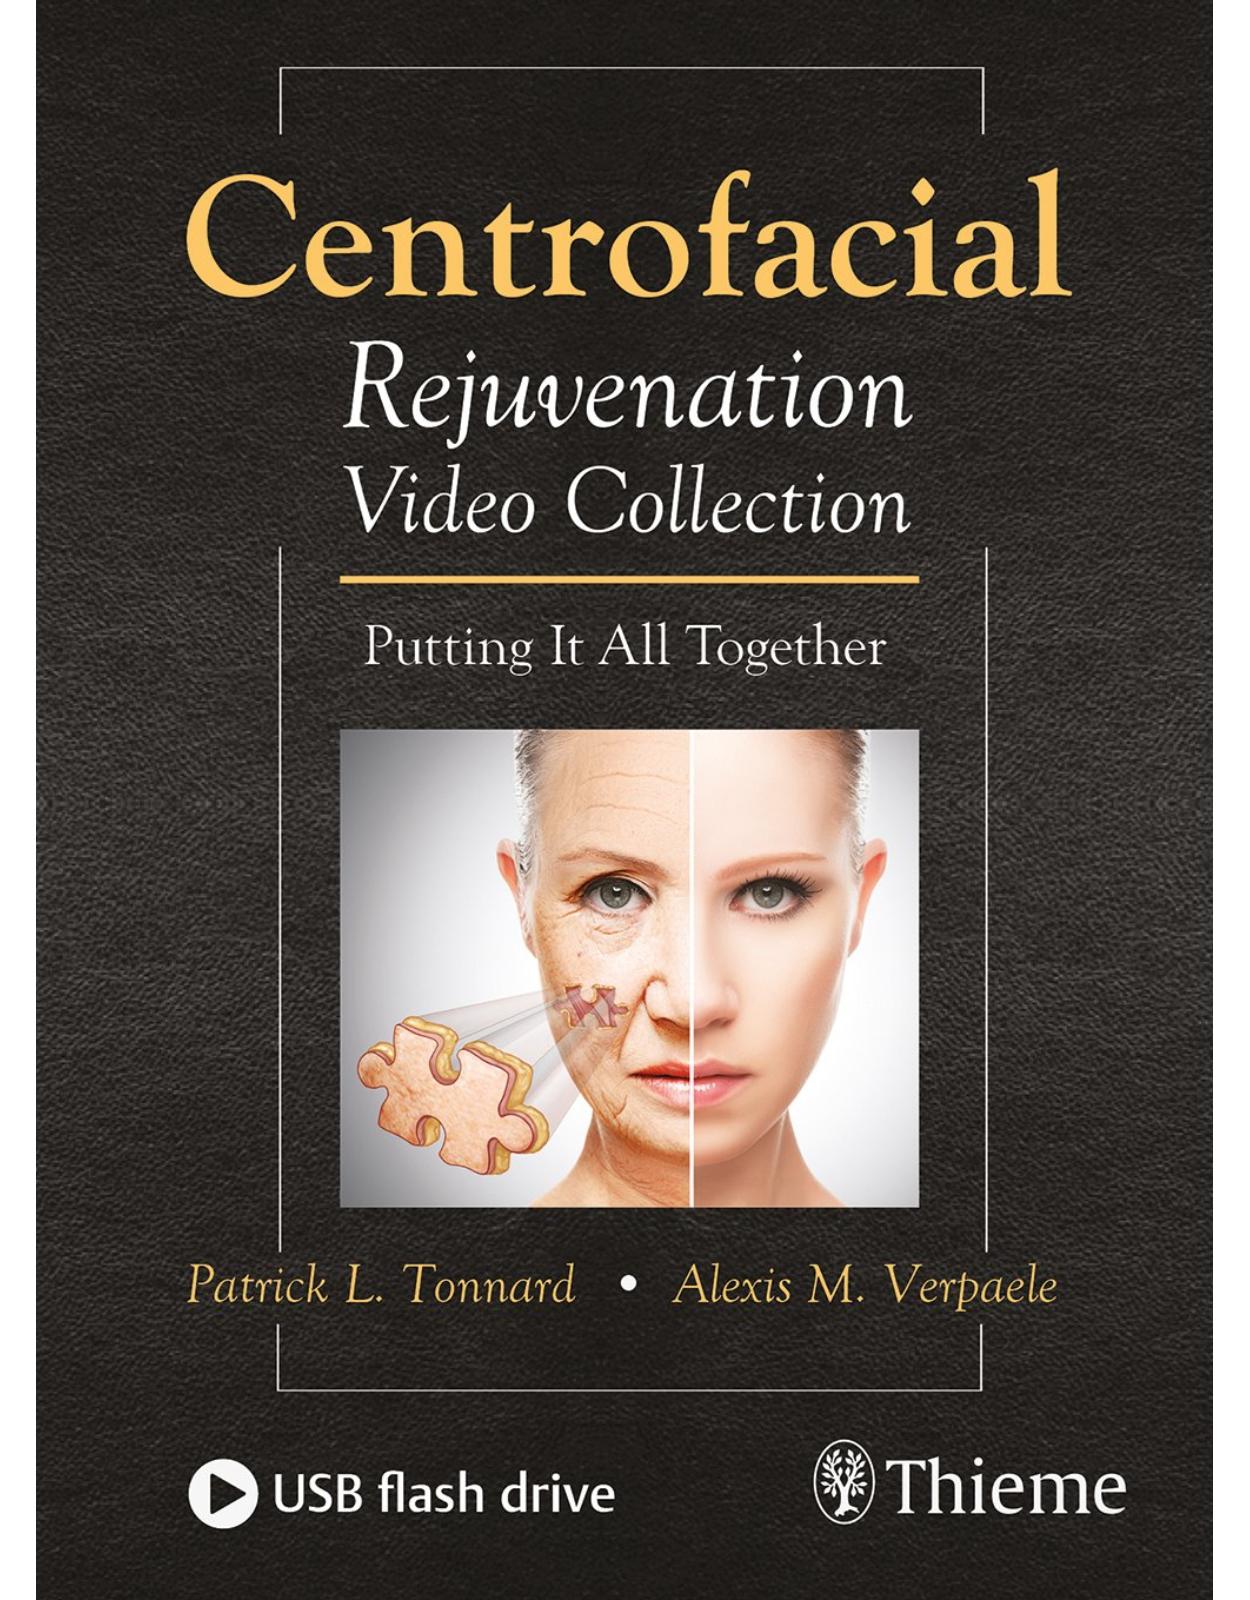 Centrofacial Rejuvenation Video Collection: Putting It All Together